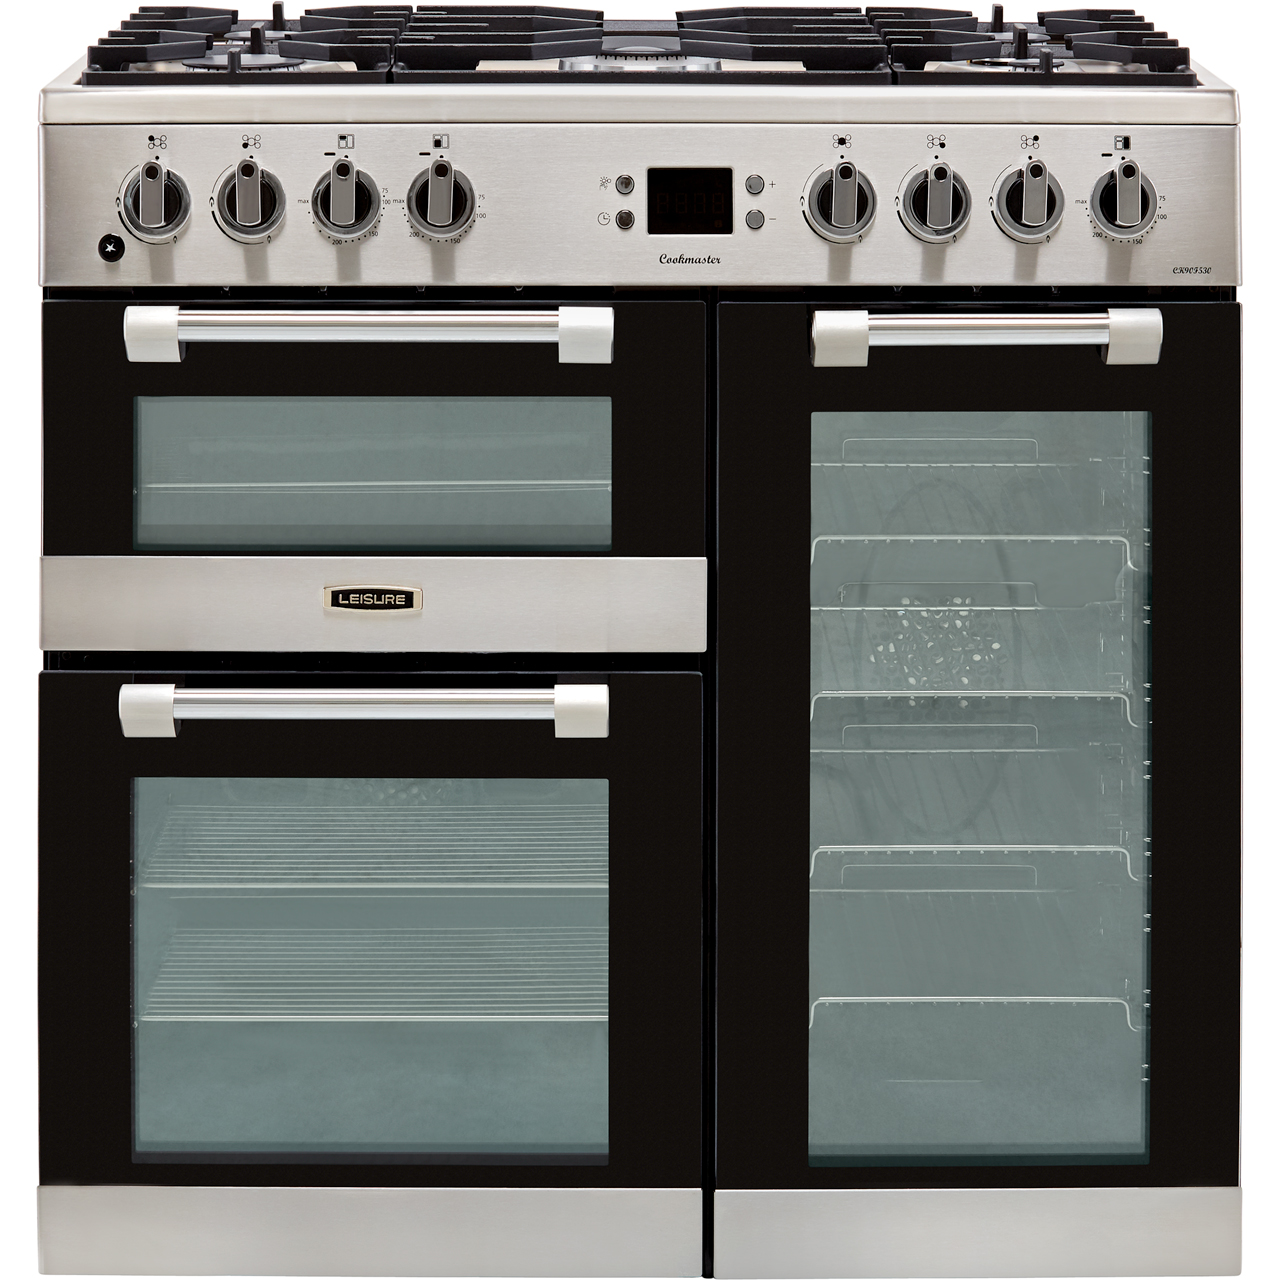 Leisure Cookmaster CK90F530X 90cm Dual Fuel Range Cooker - Stainless Steel - A/A/A Rated, Stainless Steel